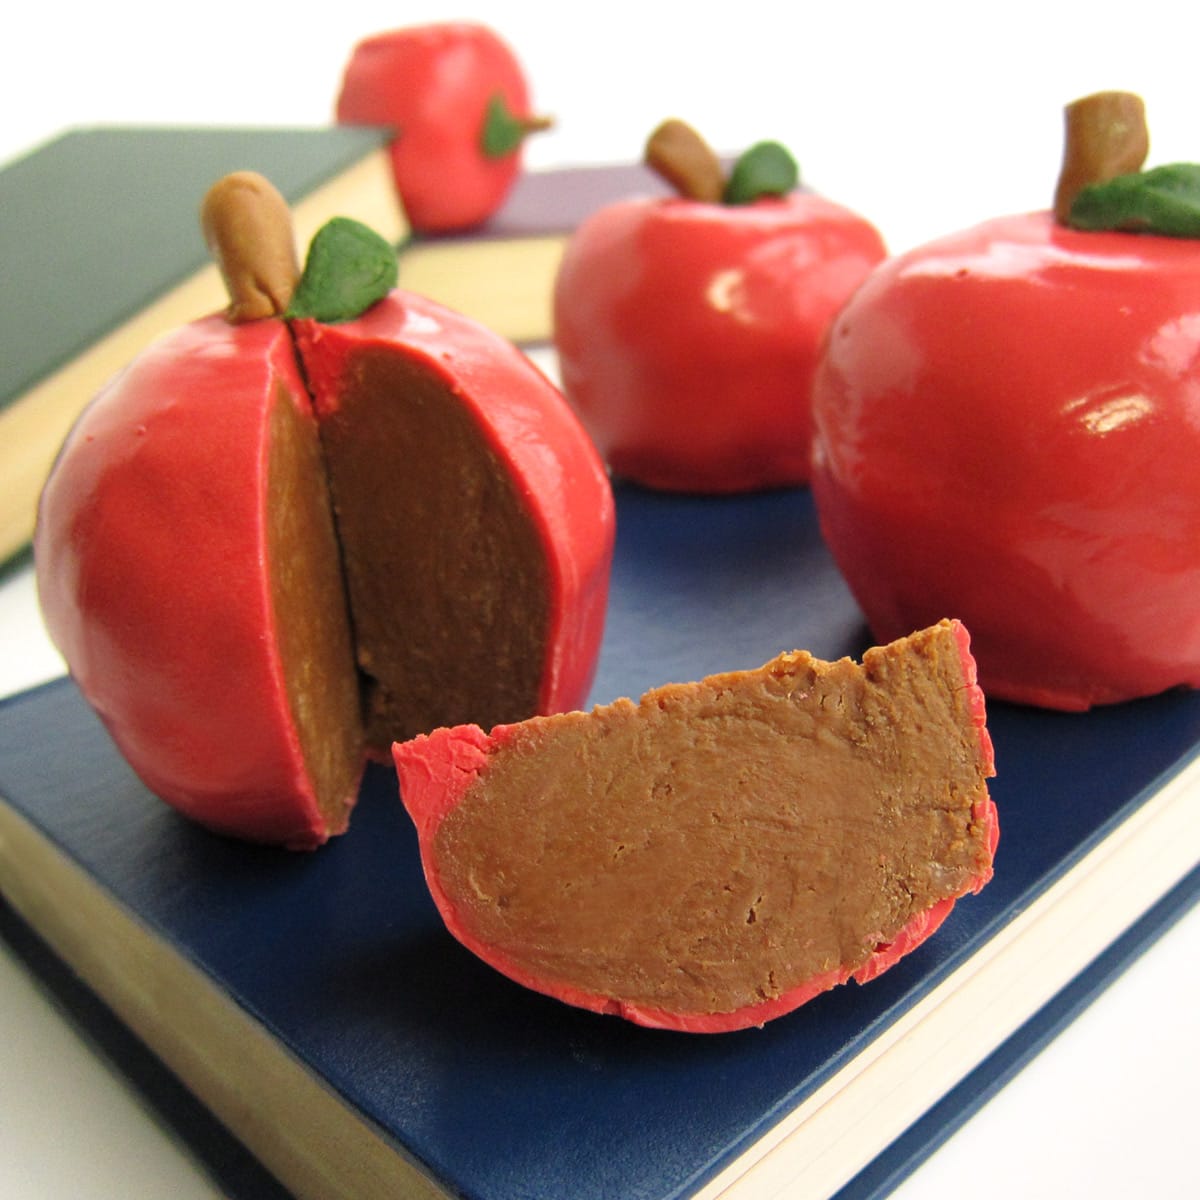 inside-out caramel apples made with chocolate caramel fudge dipped in red candy melts.